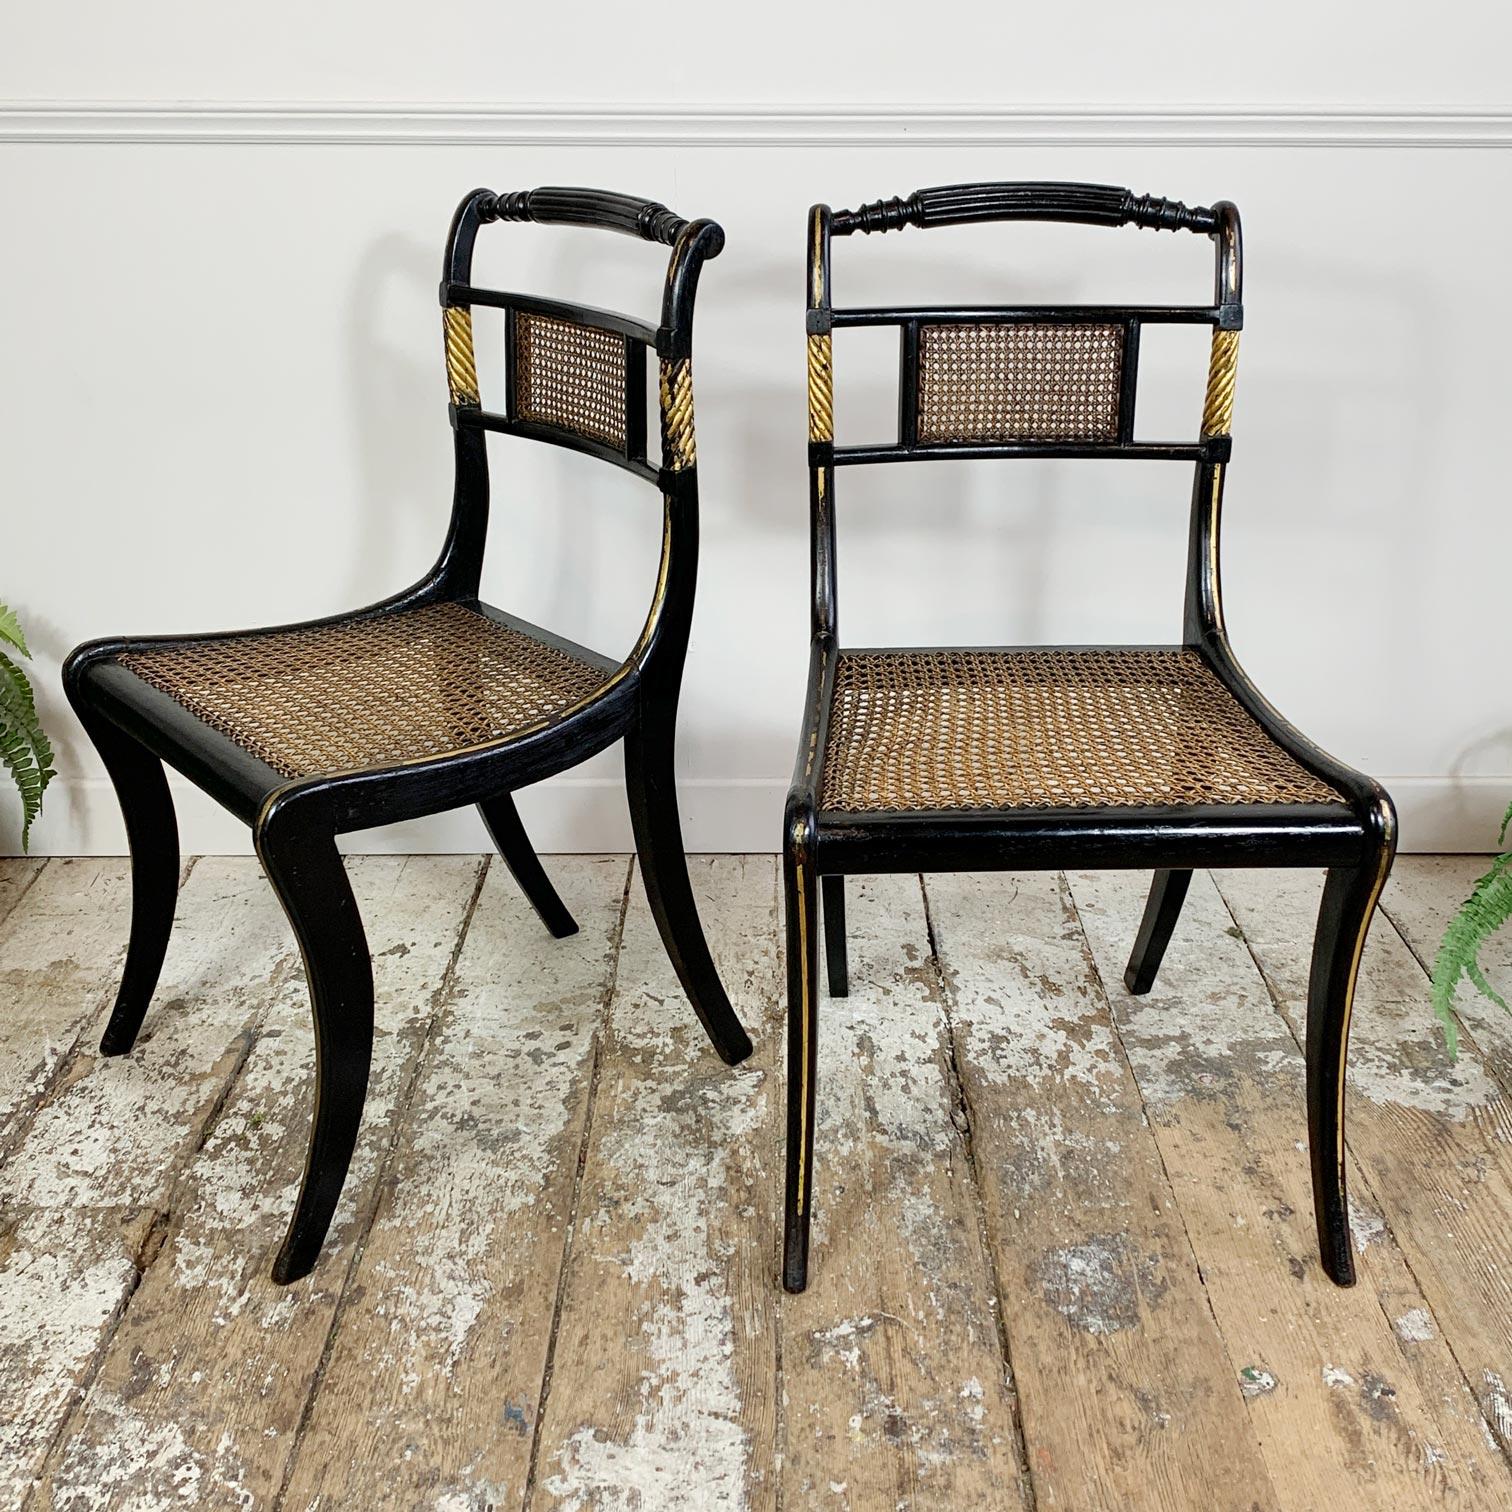 Pair of Black Ebonised and Parcel Gilt Egyptian Revival Regency Chairs 1